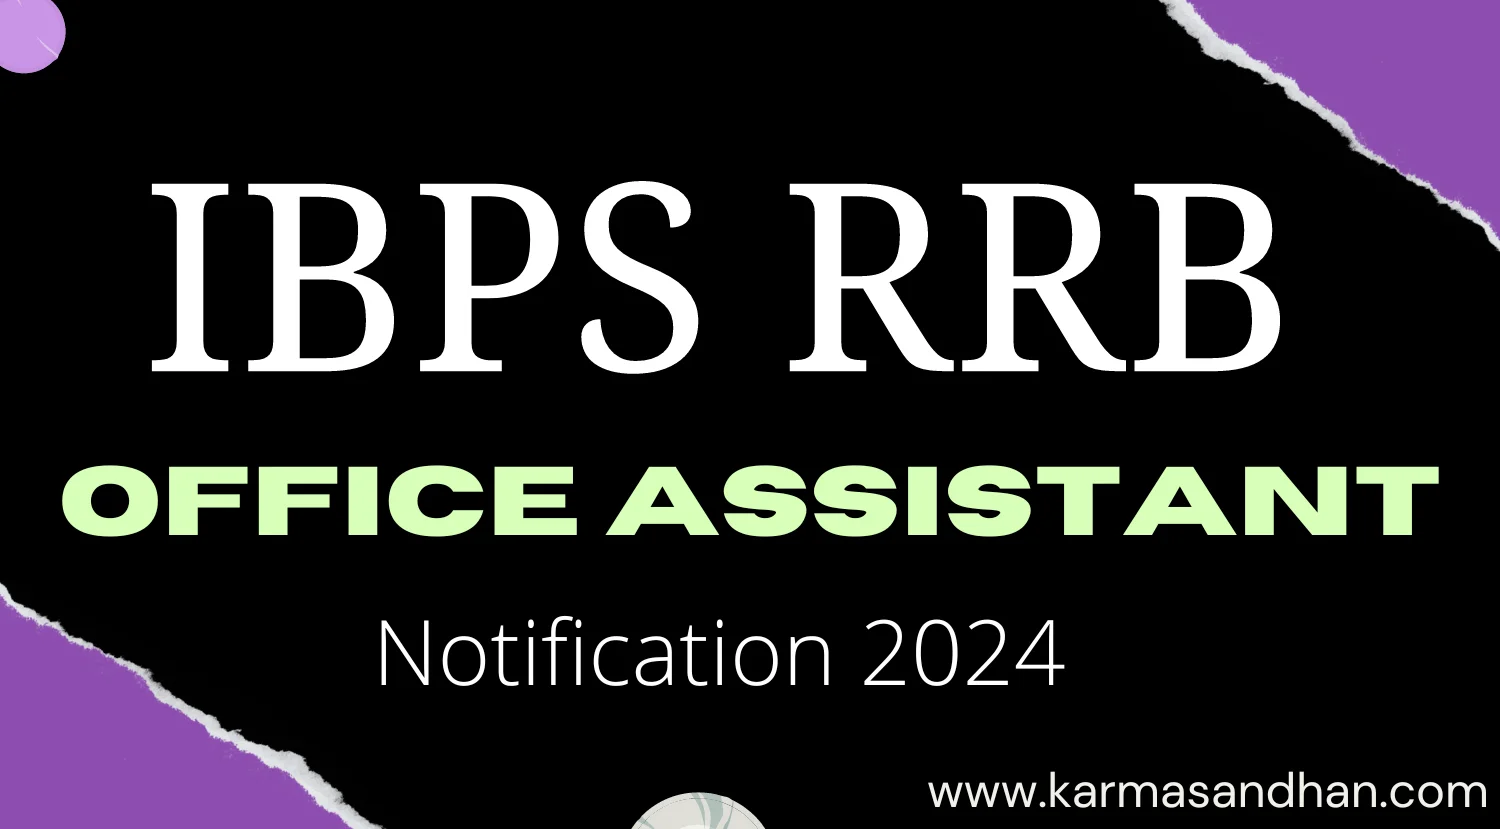 IBPS RRB Office Assistant Notification 2024